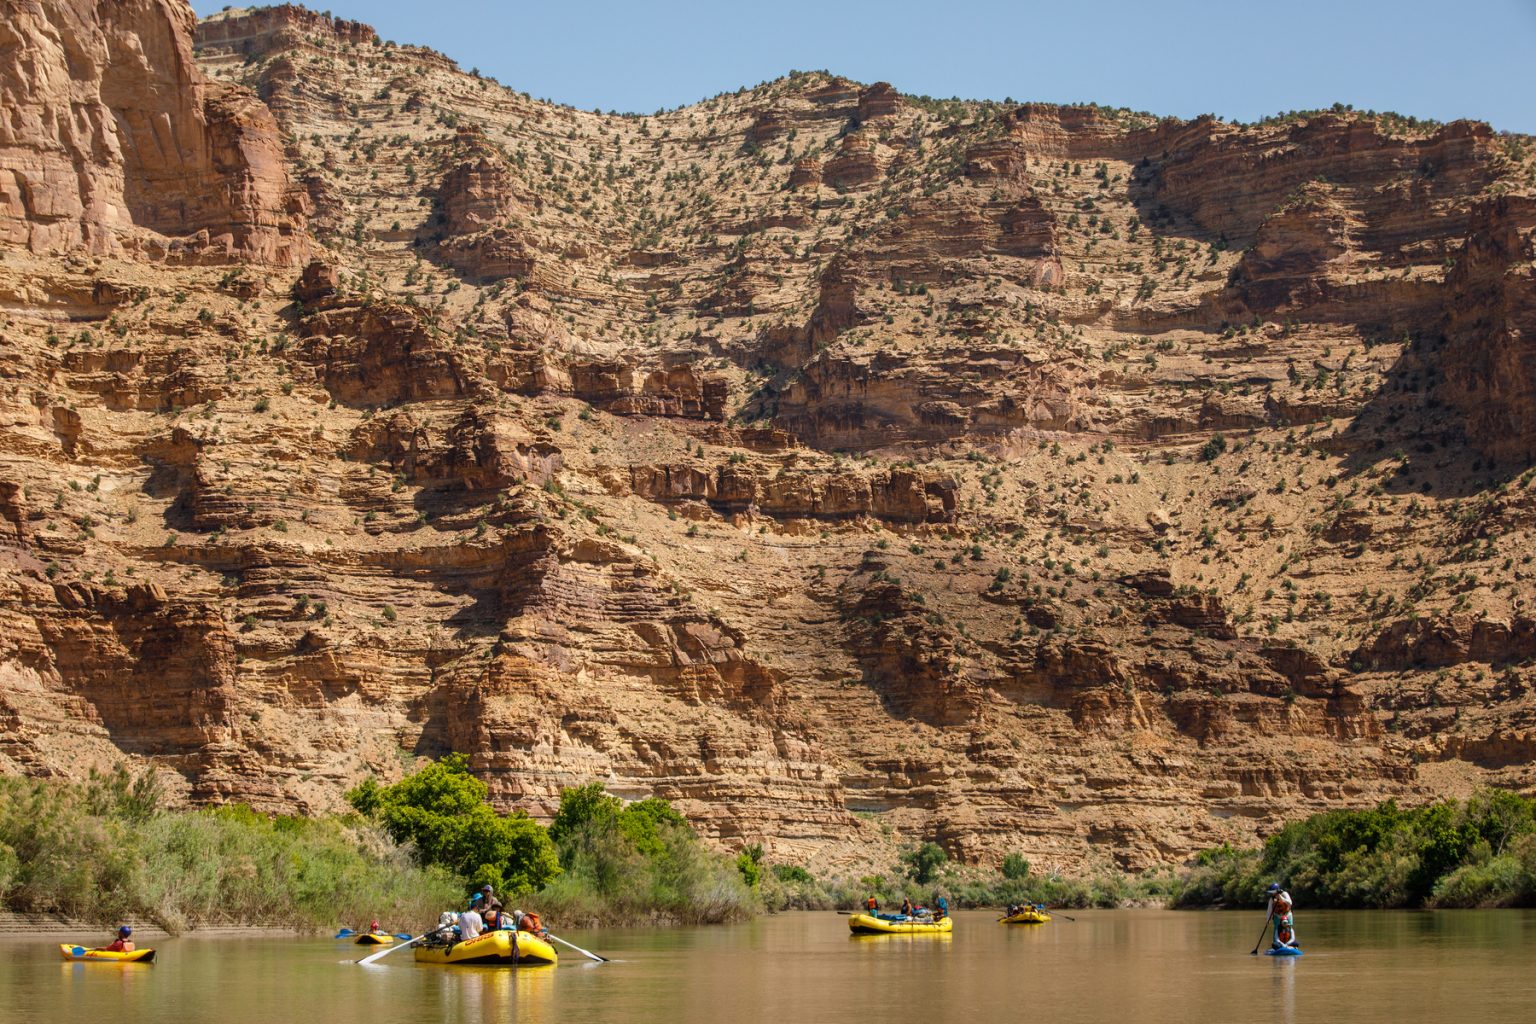 Floating through Desolation Canyon on a standup paddle board, inflatable kayak and raft